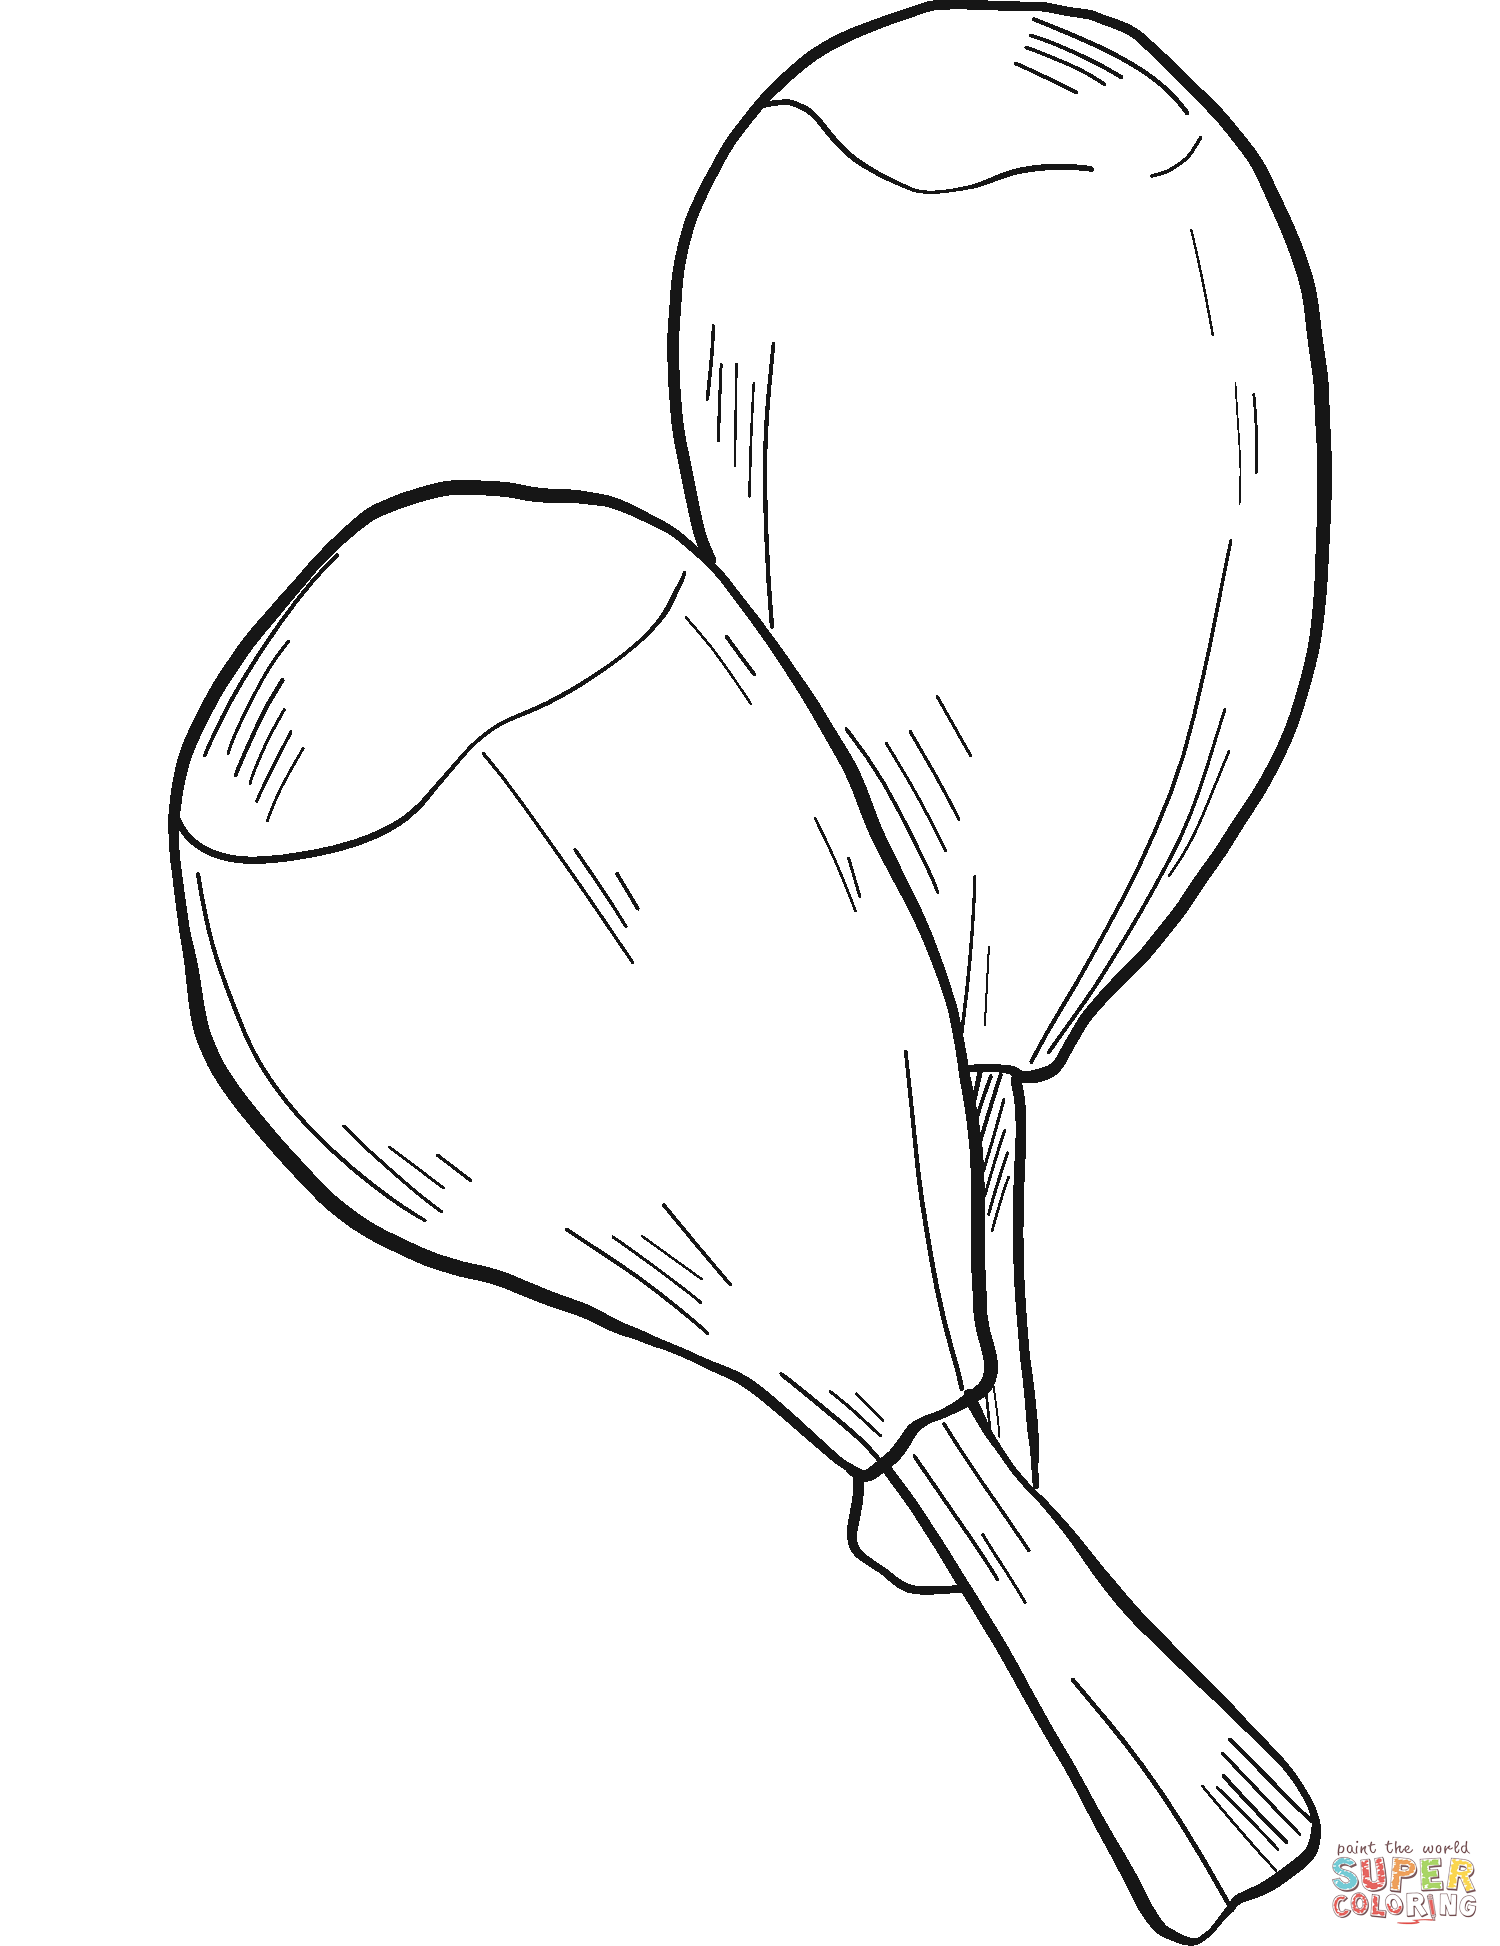 Chicken Legs coloring page | Free Printable Coloring Pages